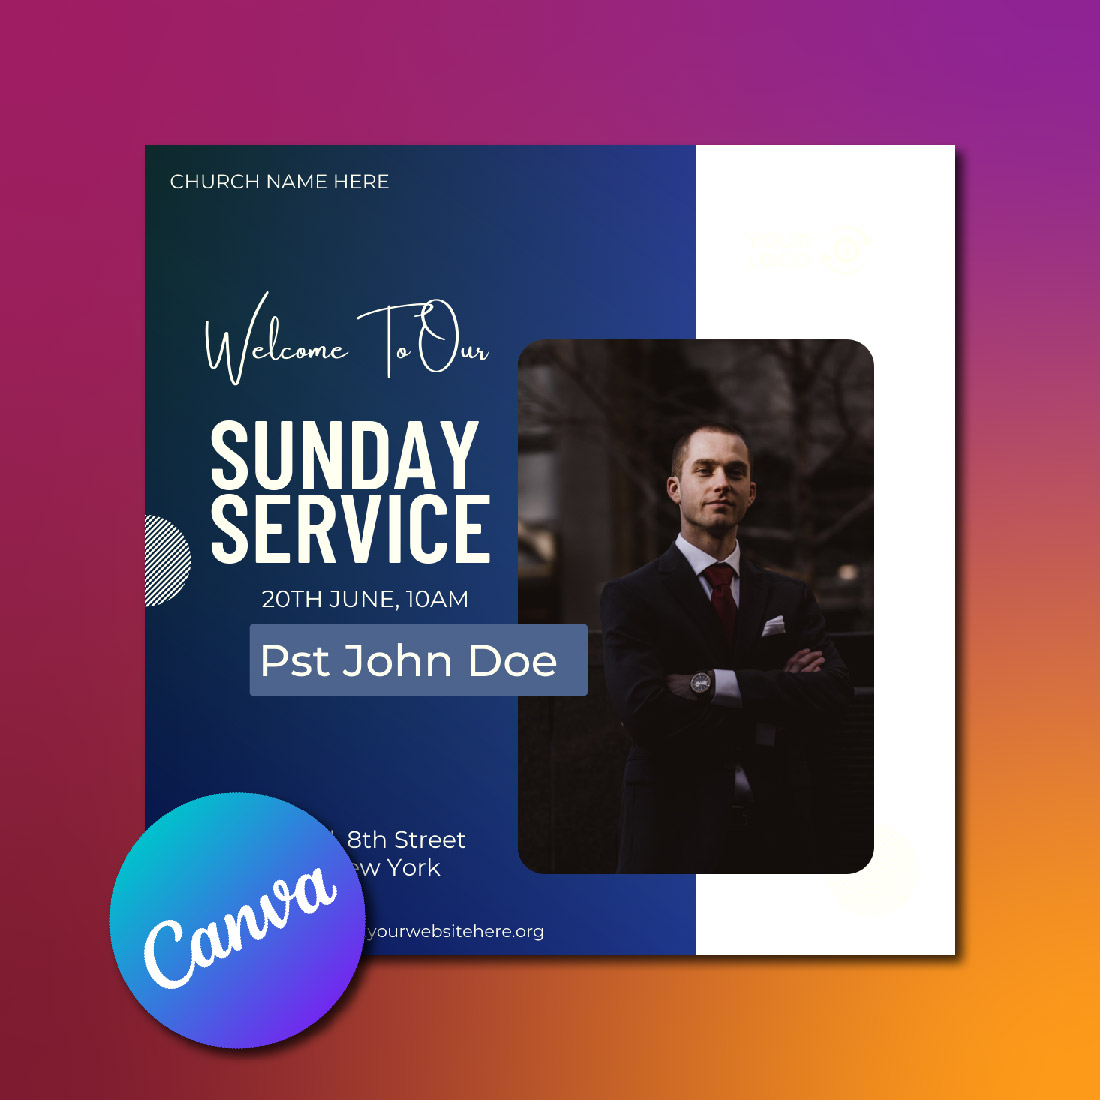 SUNDAY SERVICE FLYER CANVA TEMPLATE cover image.